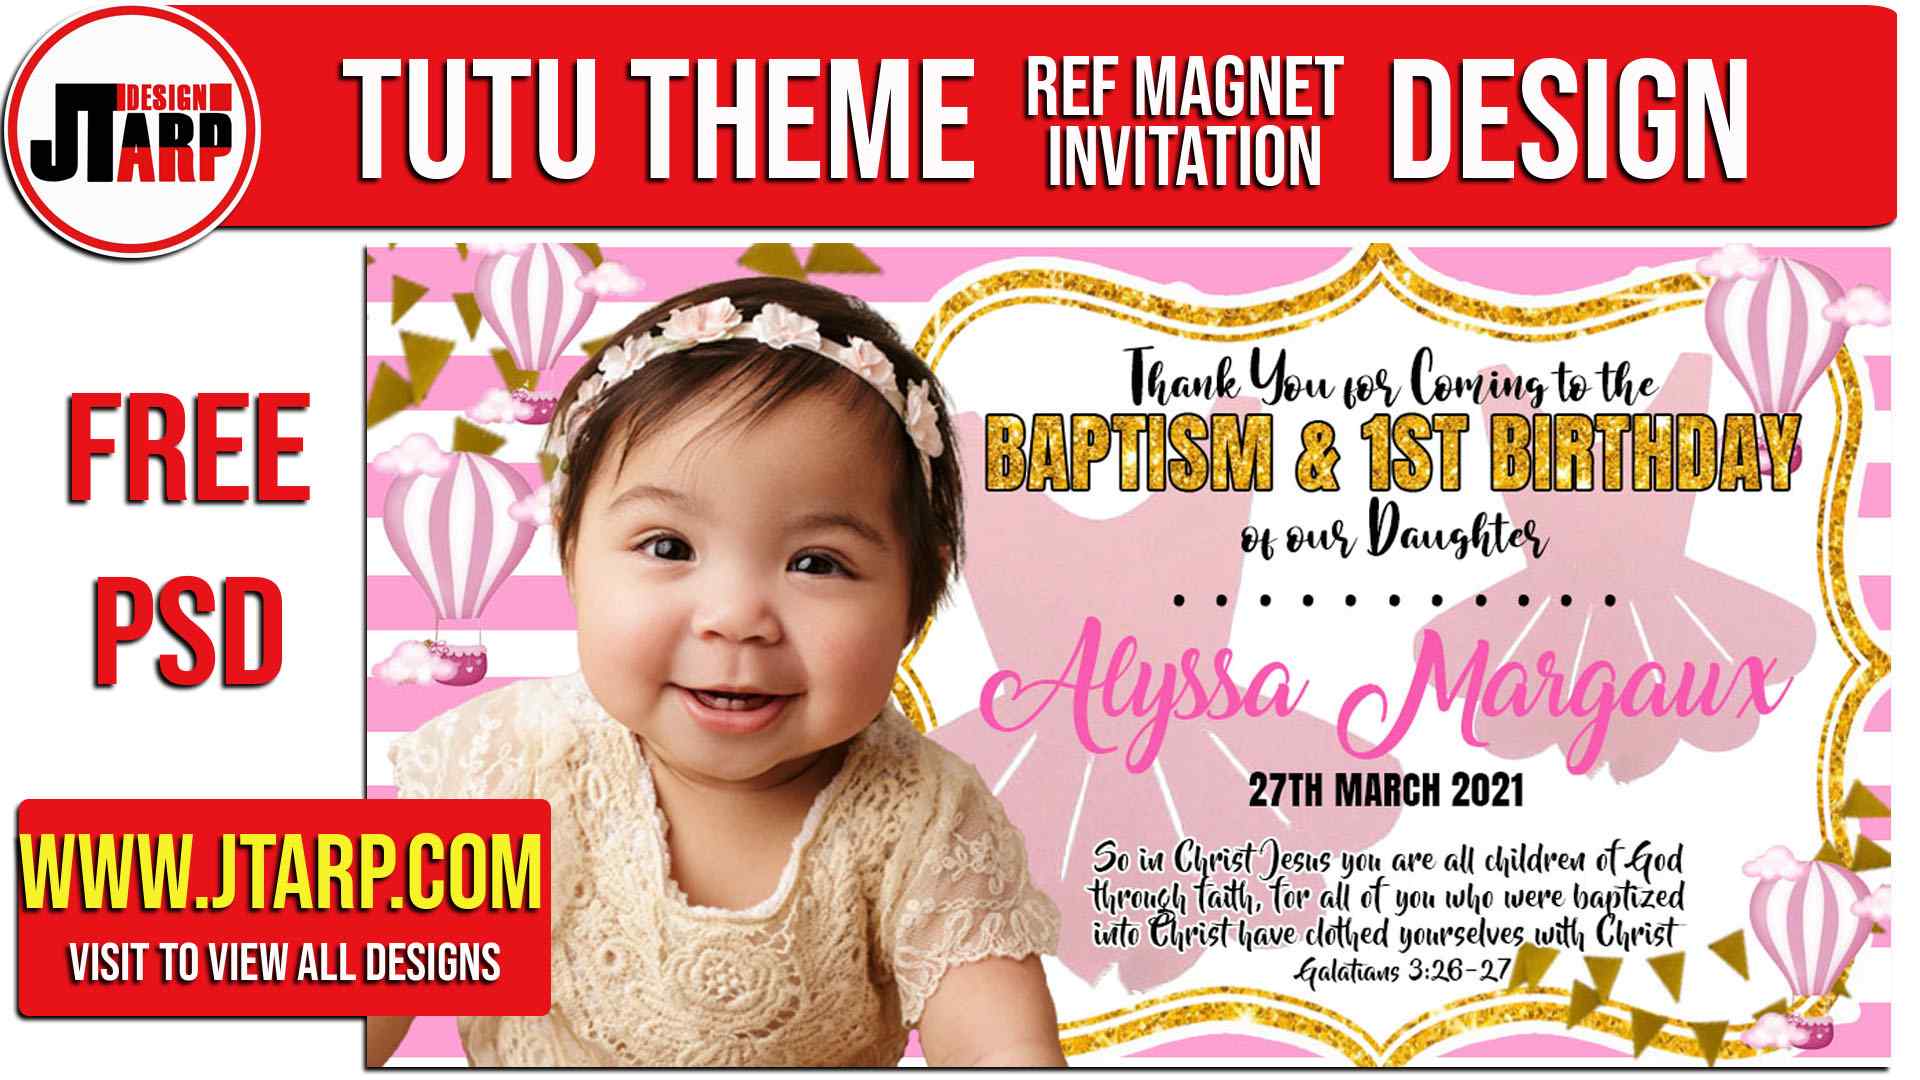 How to make Tutu Theme Pink and Gold Ref Magnet and for Invitation Design